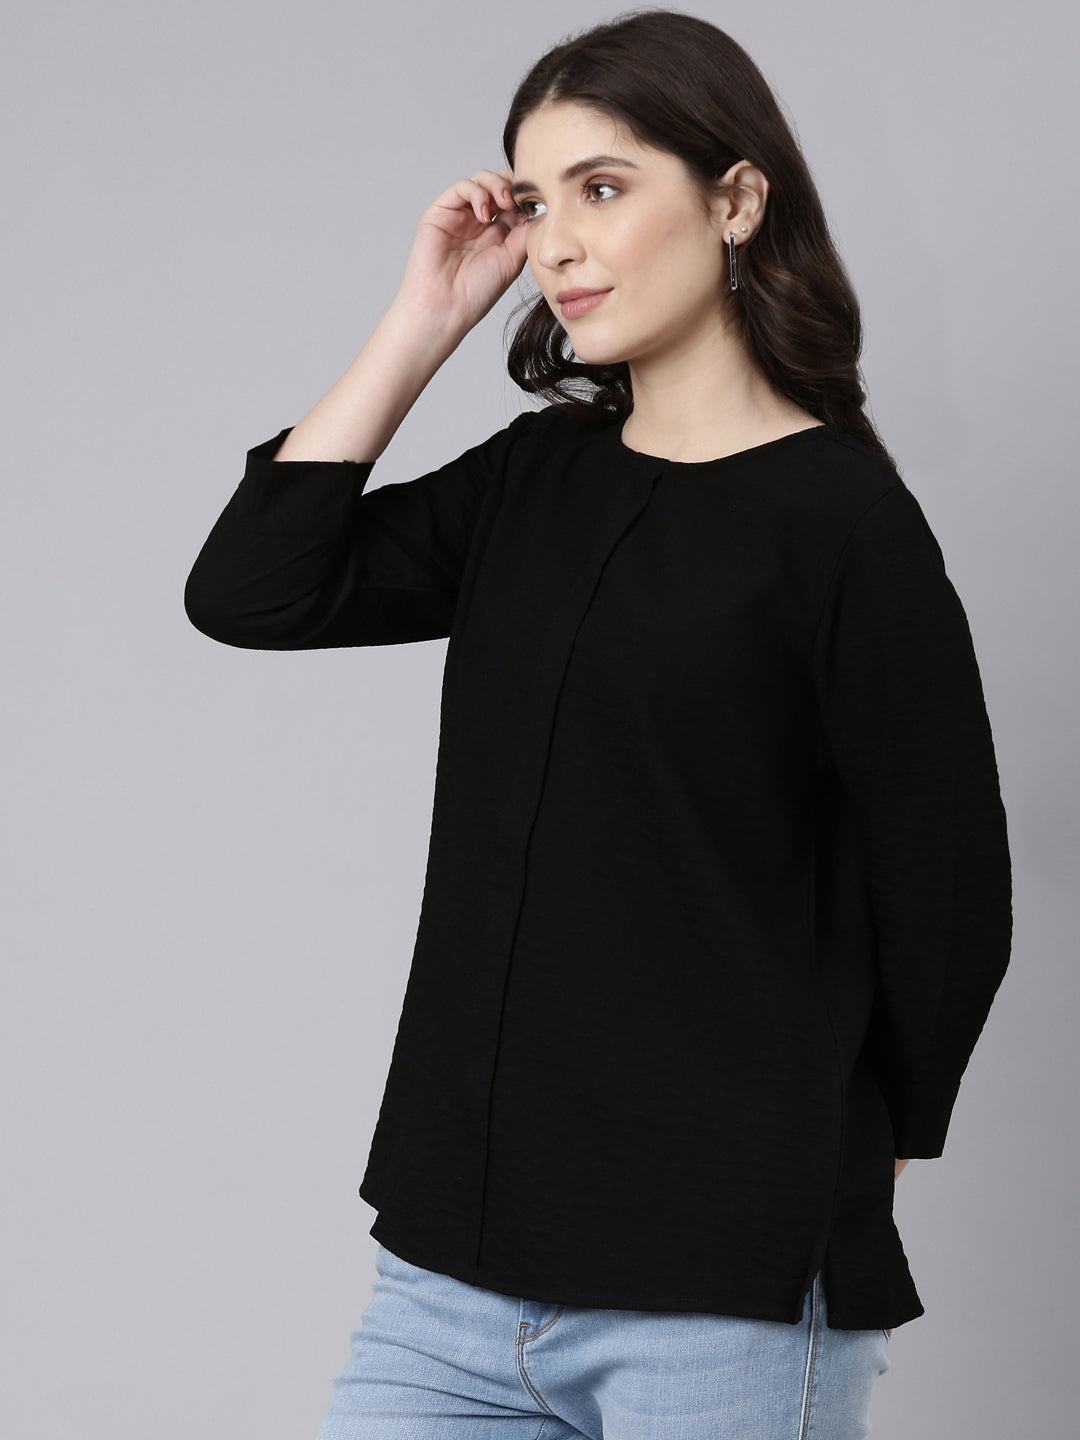 TheShaili Poly Crape Casual Black Round Neck Top for Womens & Girls/Casual Top for Office College Work Casual Wear